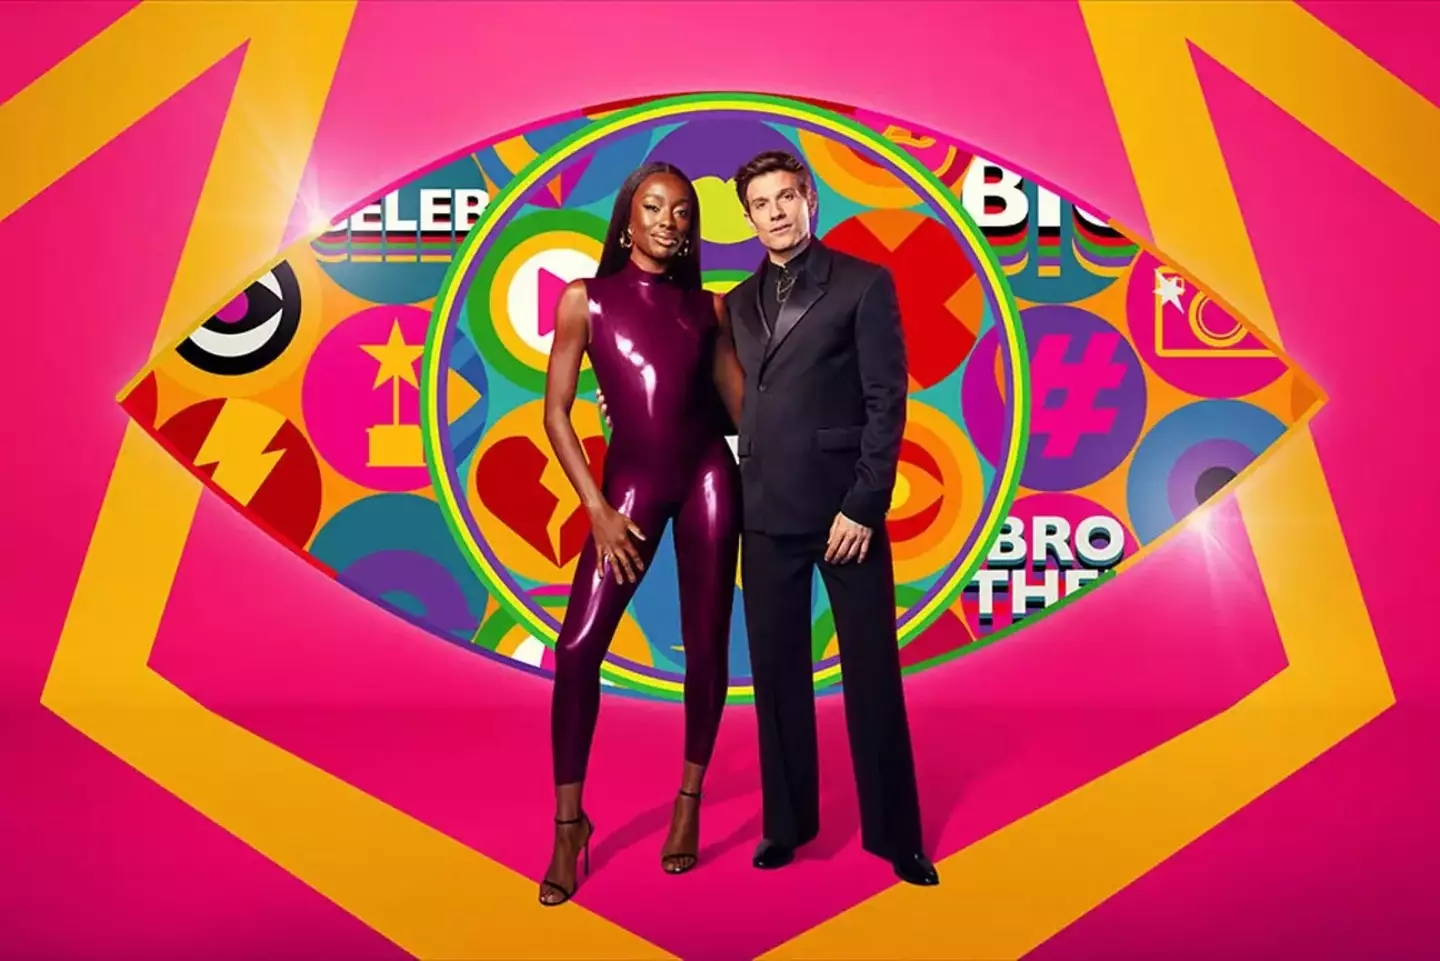 Celebrity Big Brother will be premiering on ITV1 and ITVX next Monday (4 March).